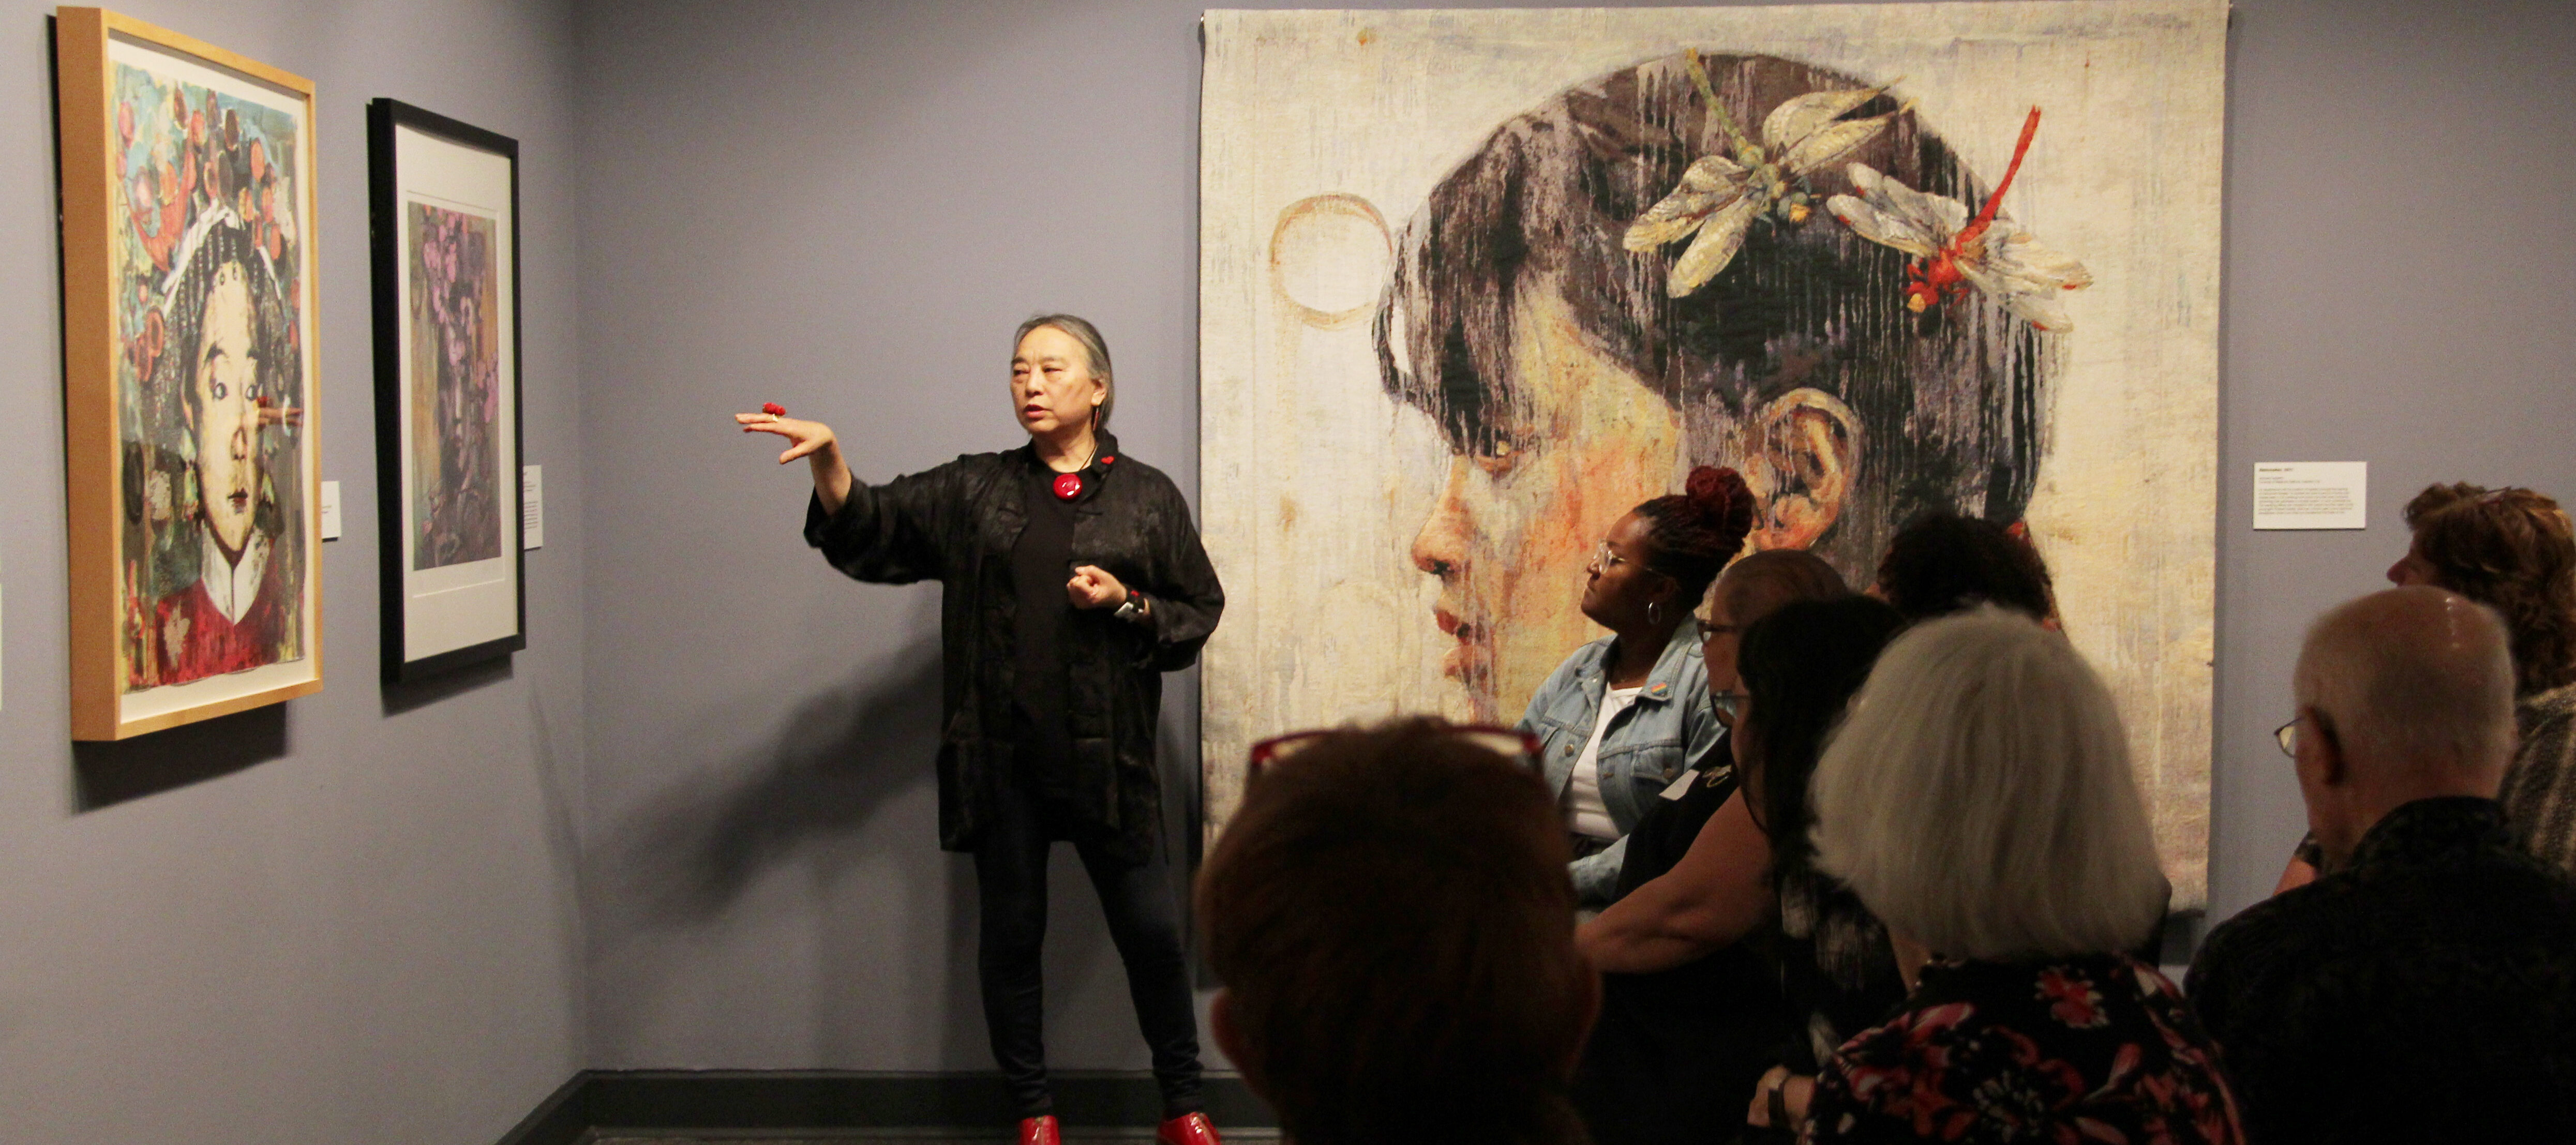 Hung Liu speaks to an audience about her paintings of Chinese women, which hang on the walls around her. Liu is a light-skinned adult woman with gray hair in a low ponytail, dressed in black with red jewelry and shoes. She stands, gesturing with one hand at a painting to her right.